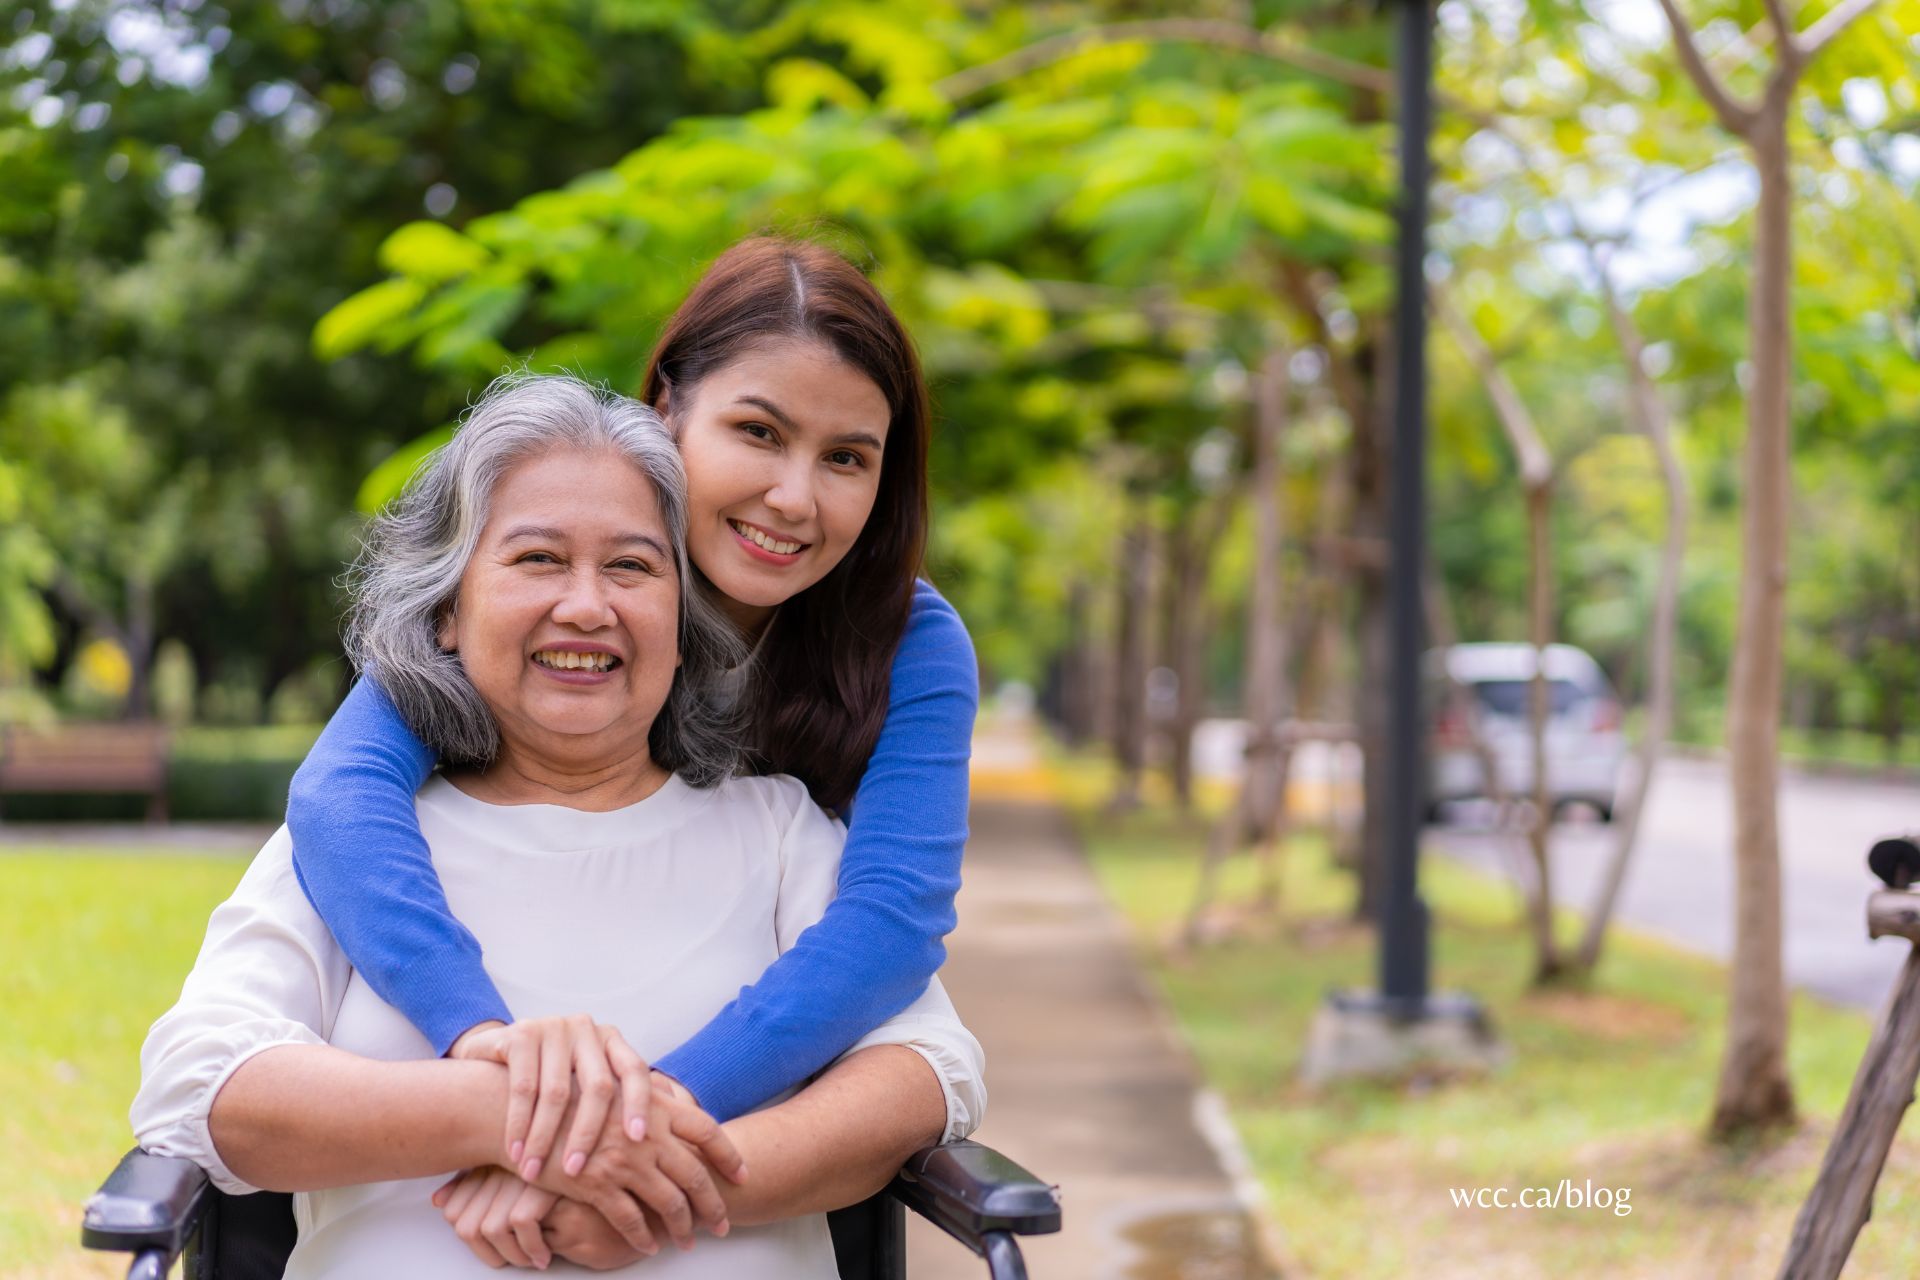 What is the difference between a caretaker and a caregiver?